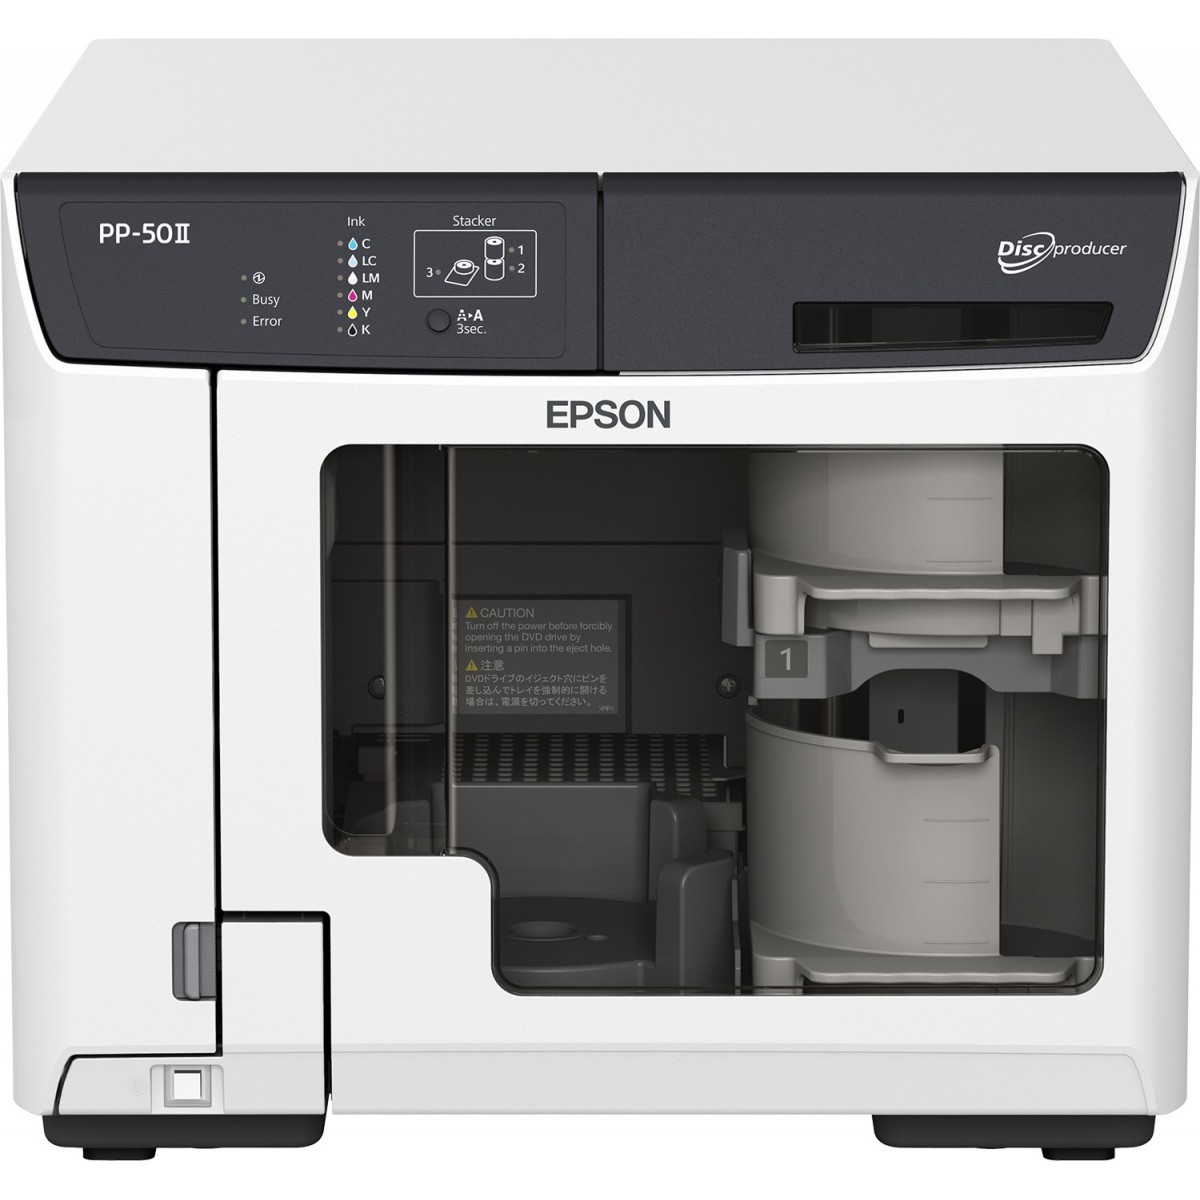 Epson Discproducer™ PP-50II - 377 x 465 x 324 mm - 21 kg - 530 mm - 720 mm - 525 mm - 25.78 g